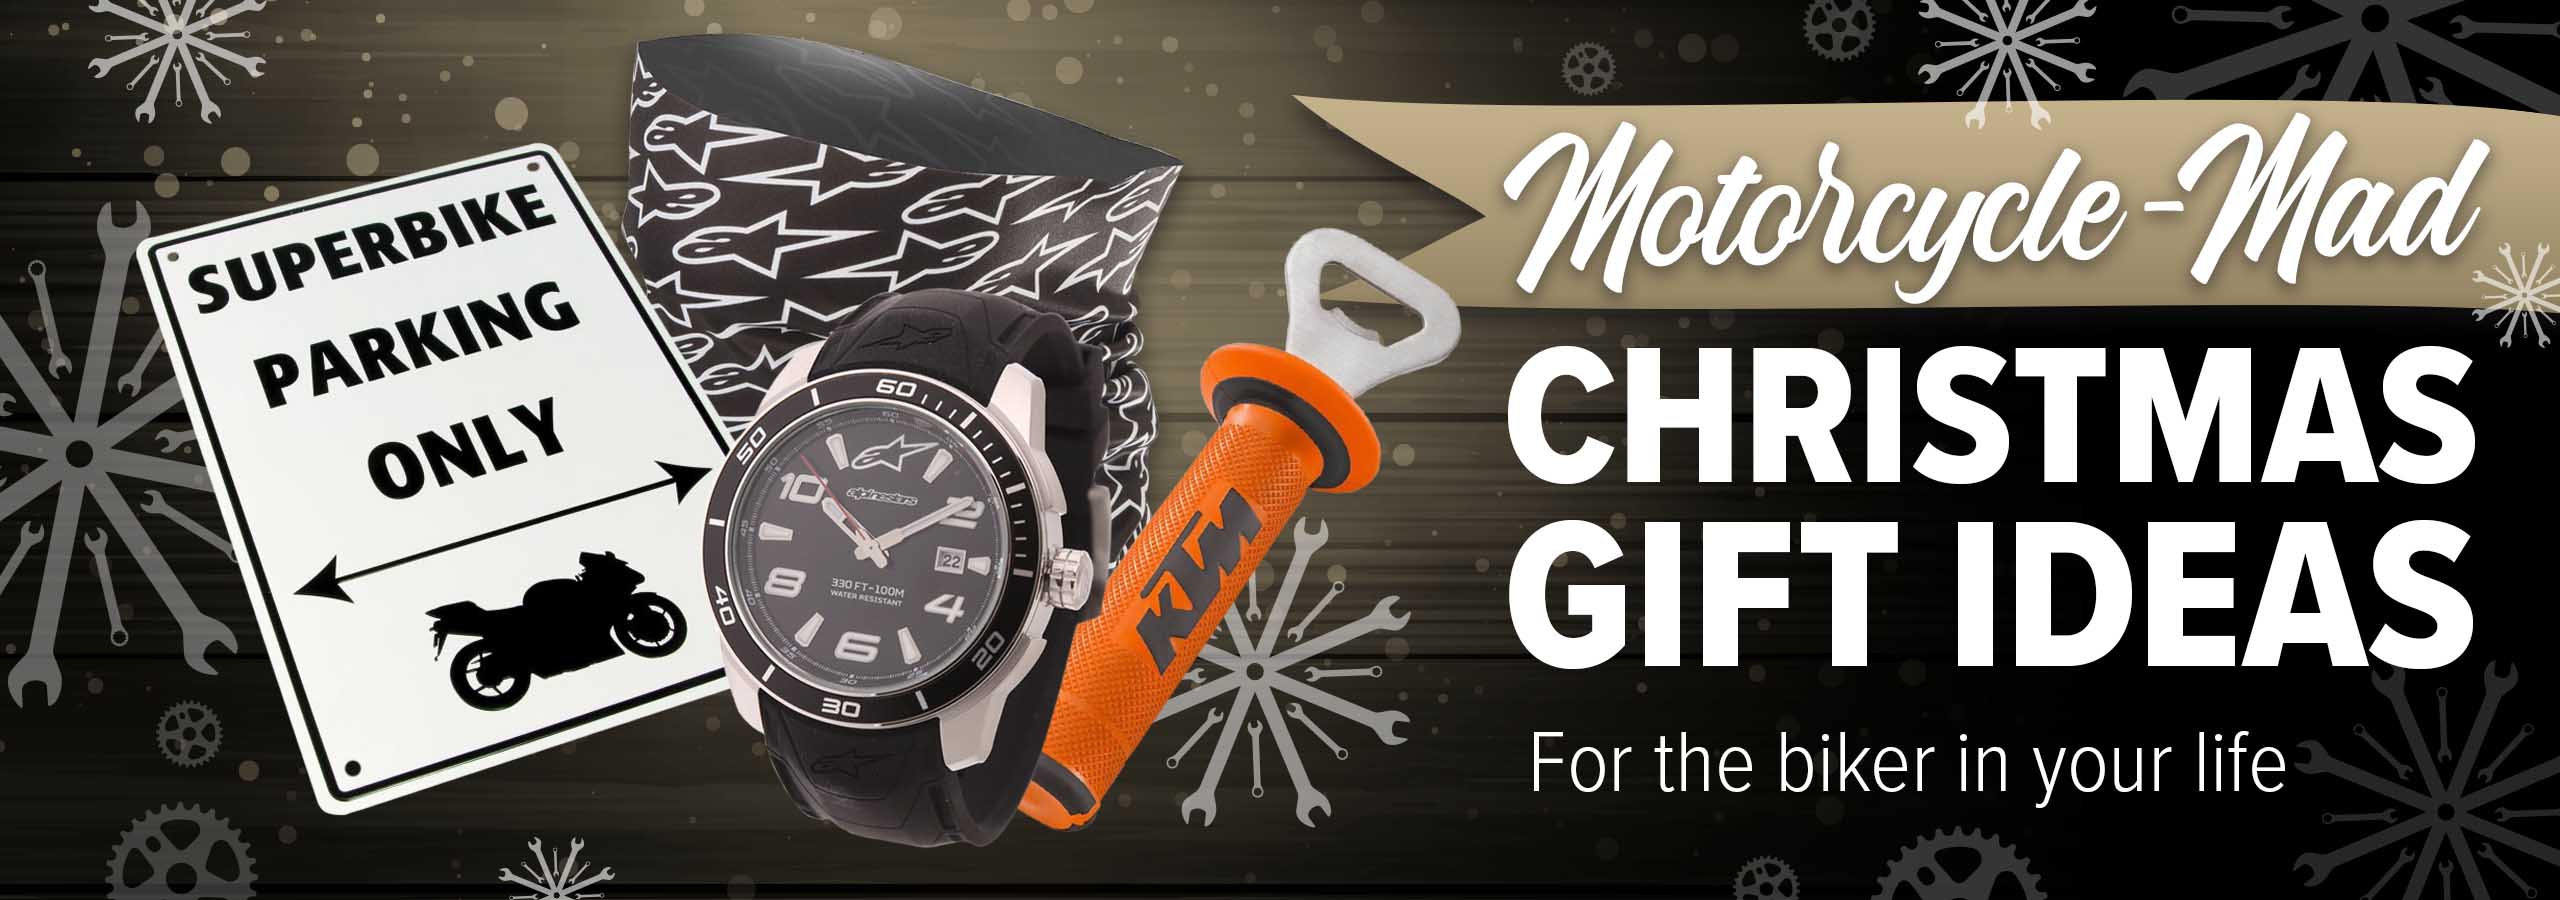 Laguna Motorcycles CHristmas gift ideas for the biker in your life